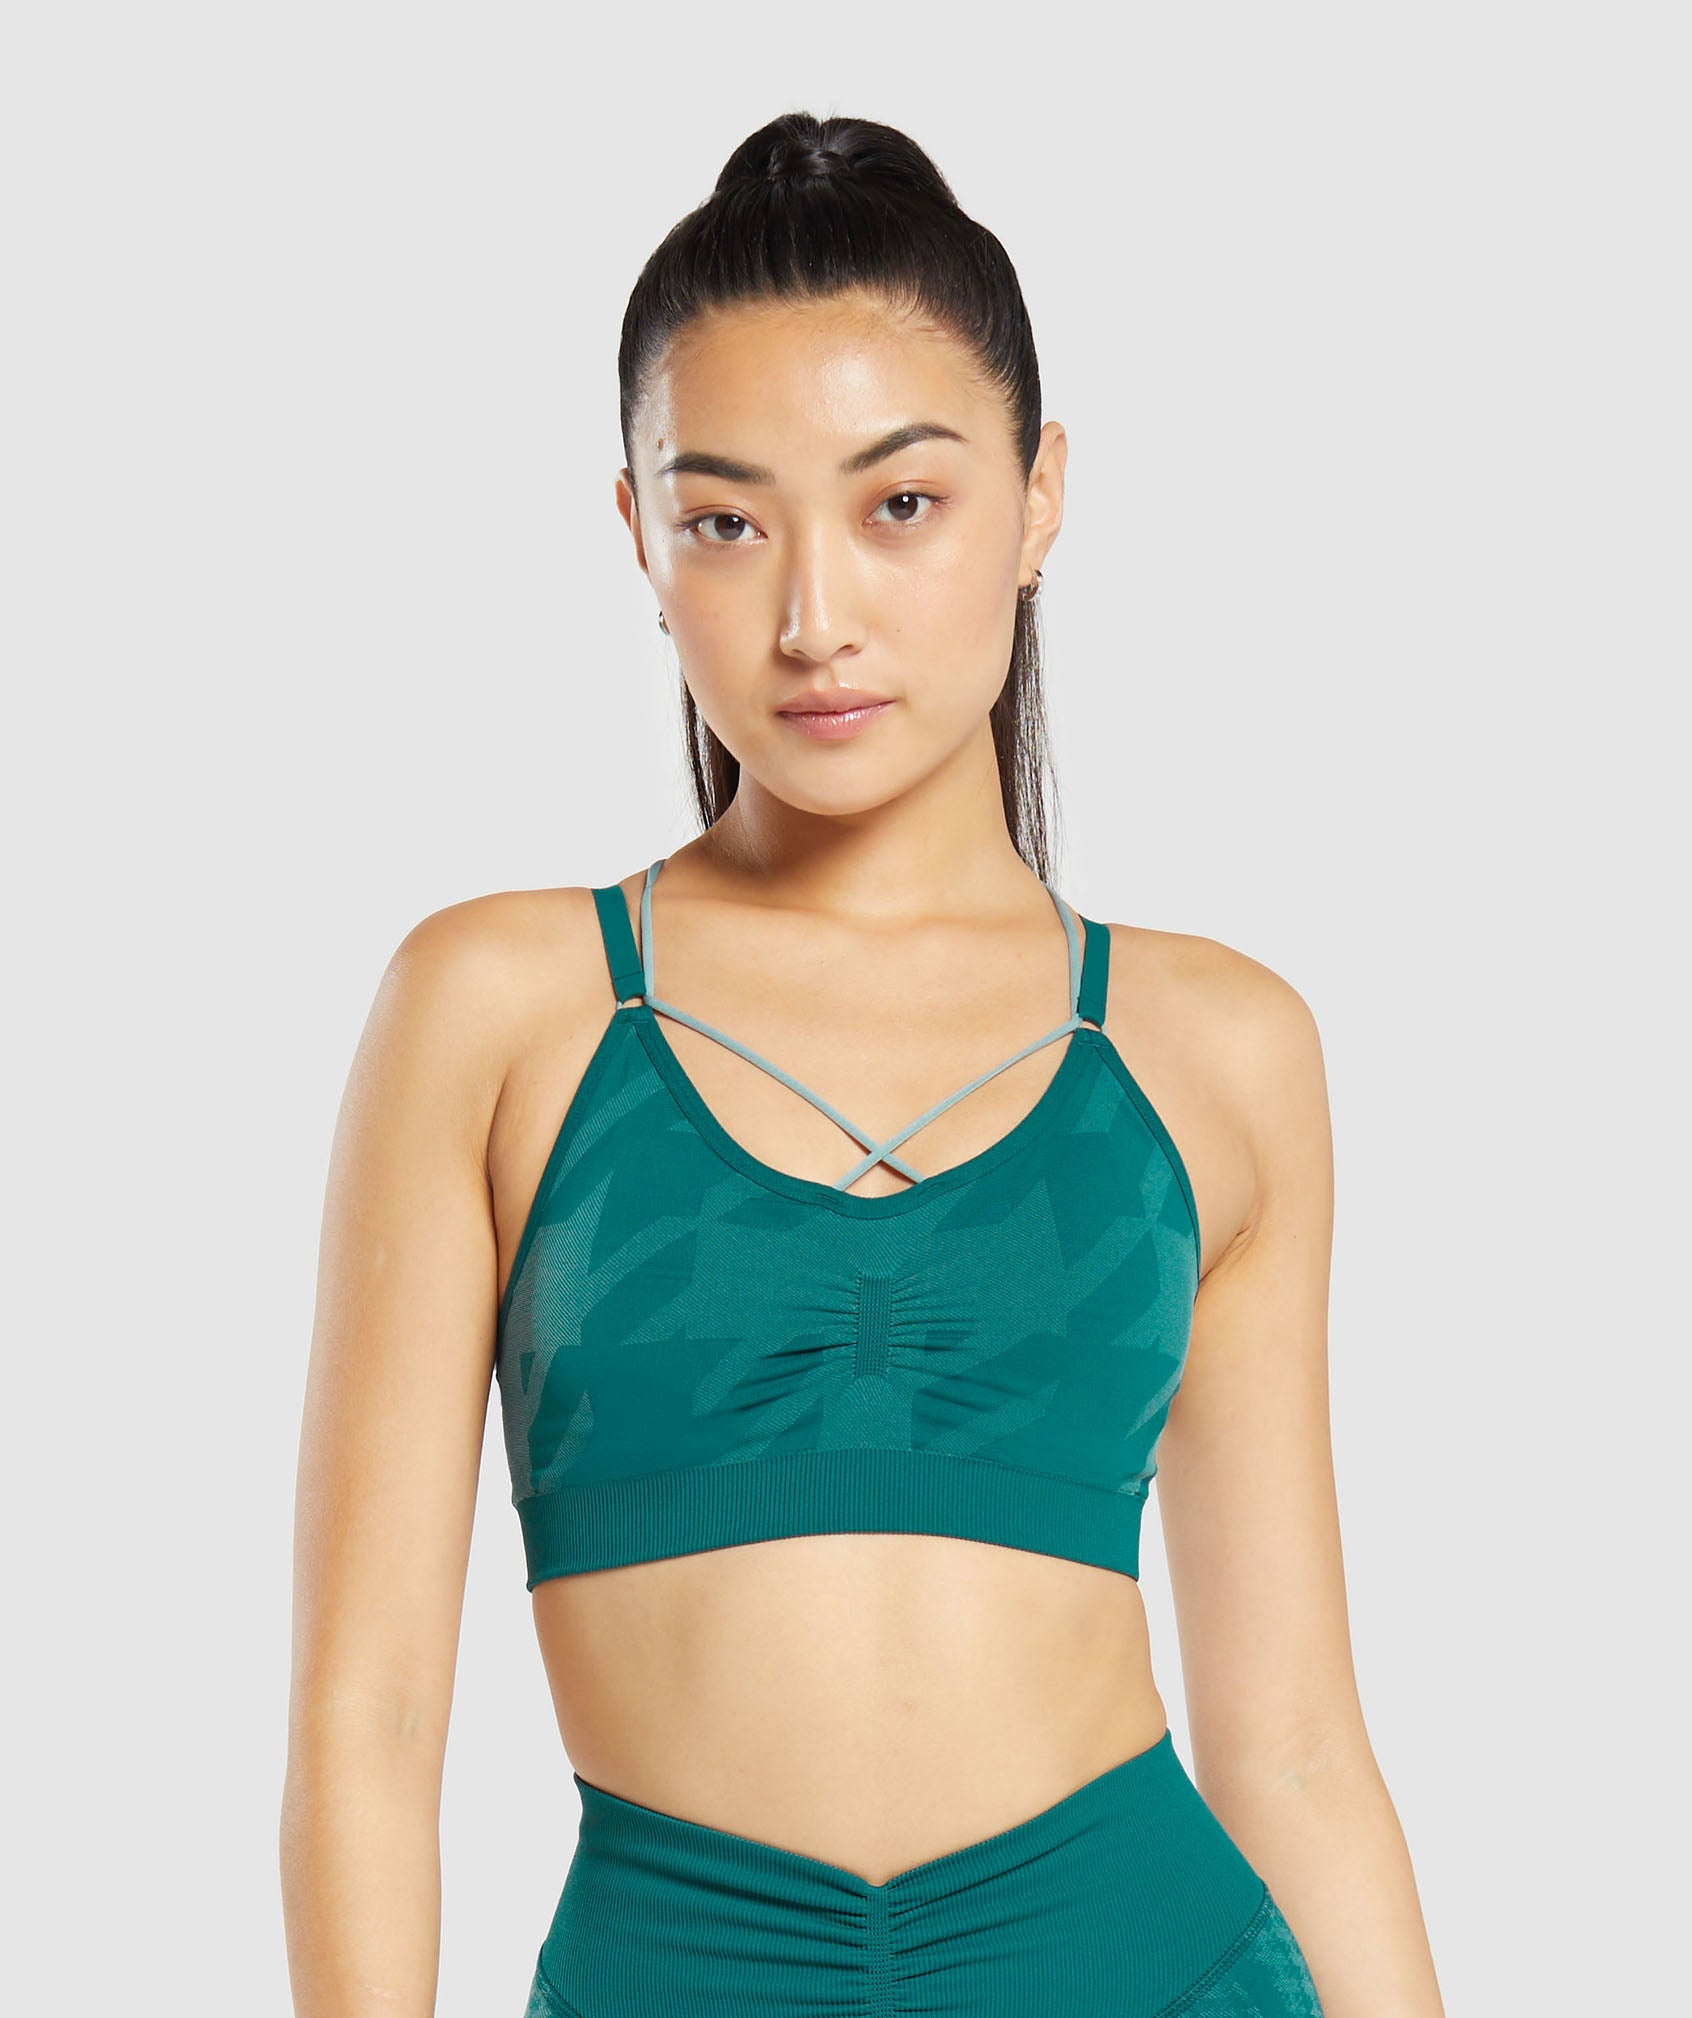 Apex Limit Seamless Ruched Sports Bra in Deep Teal/Duck Egg Blue